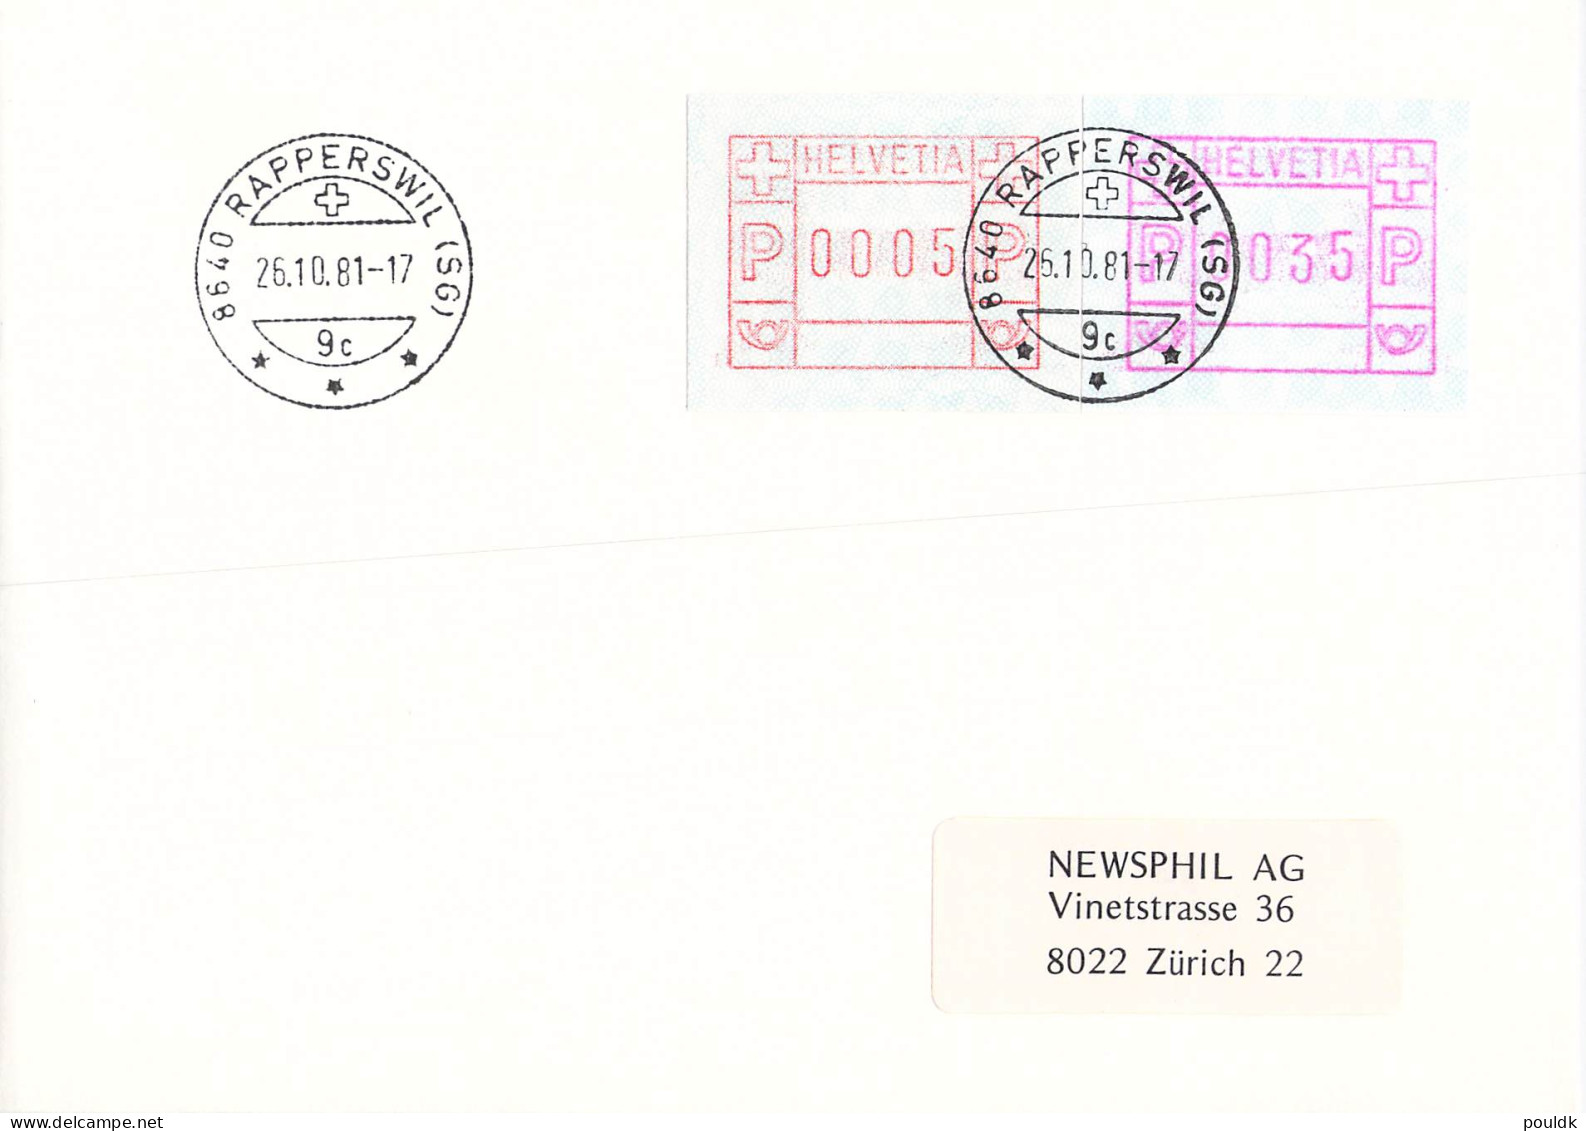 Switzerland covers/FDC franked with ATM - many errors. 25 covers. Weight 0,150 kg. Please read Sales Conditions 